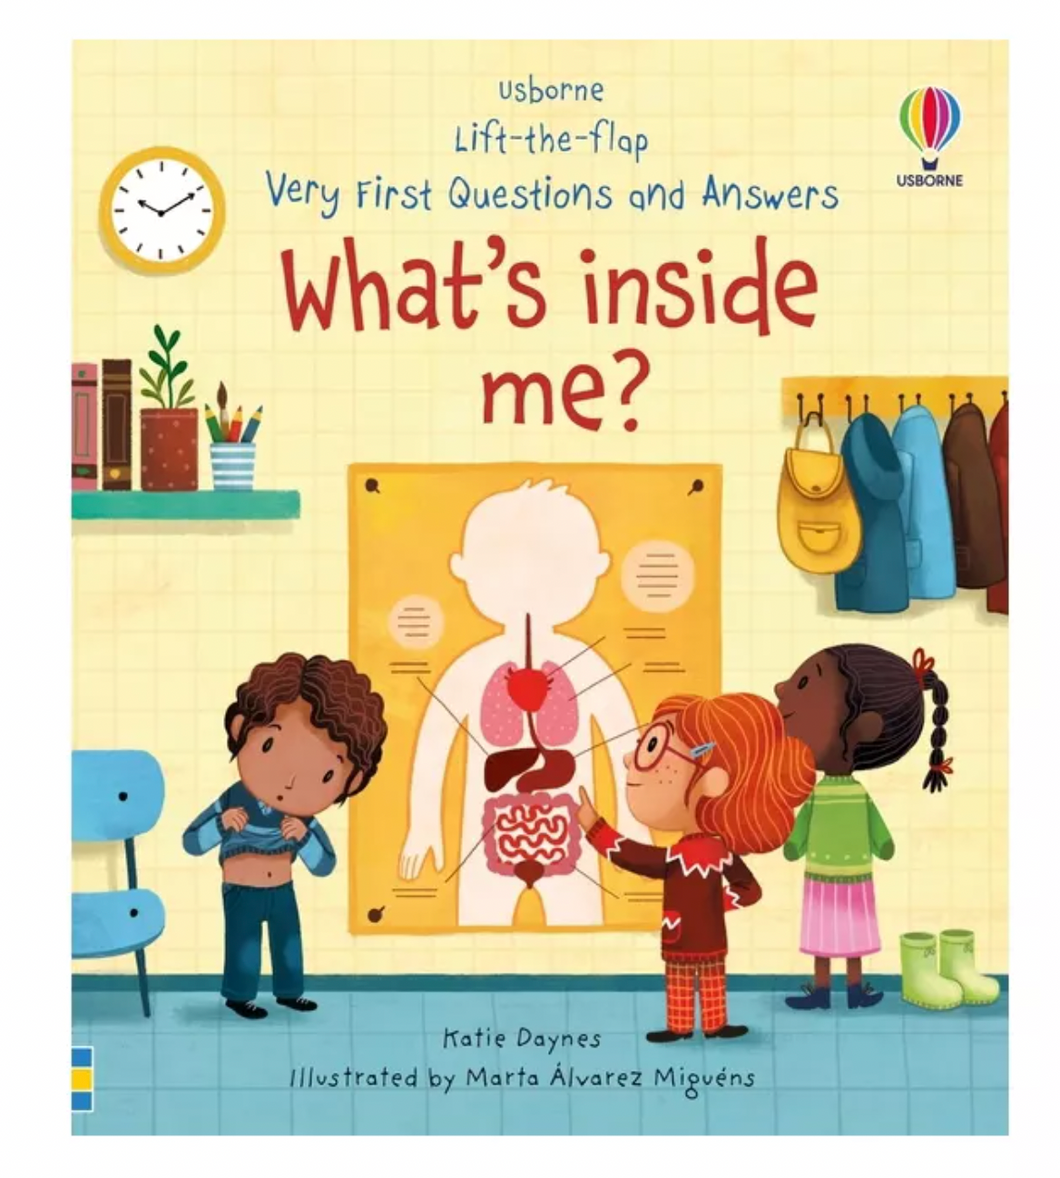 Usborne Lift-the-flap Very First Questions and Answers What's Inside Me? Hardcover Book